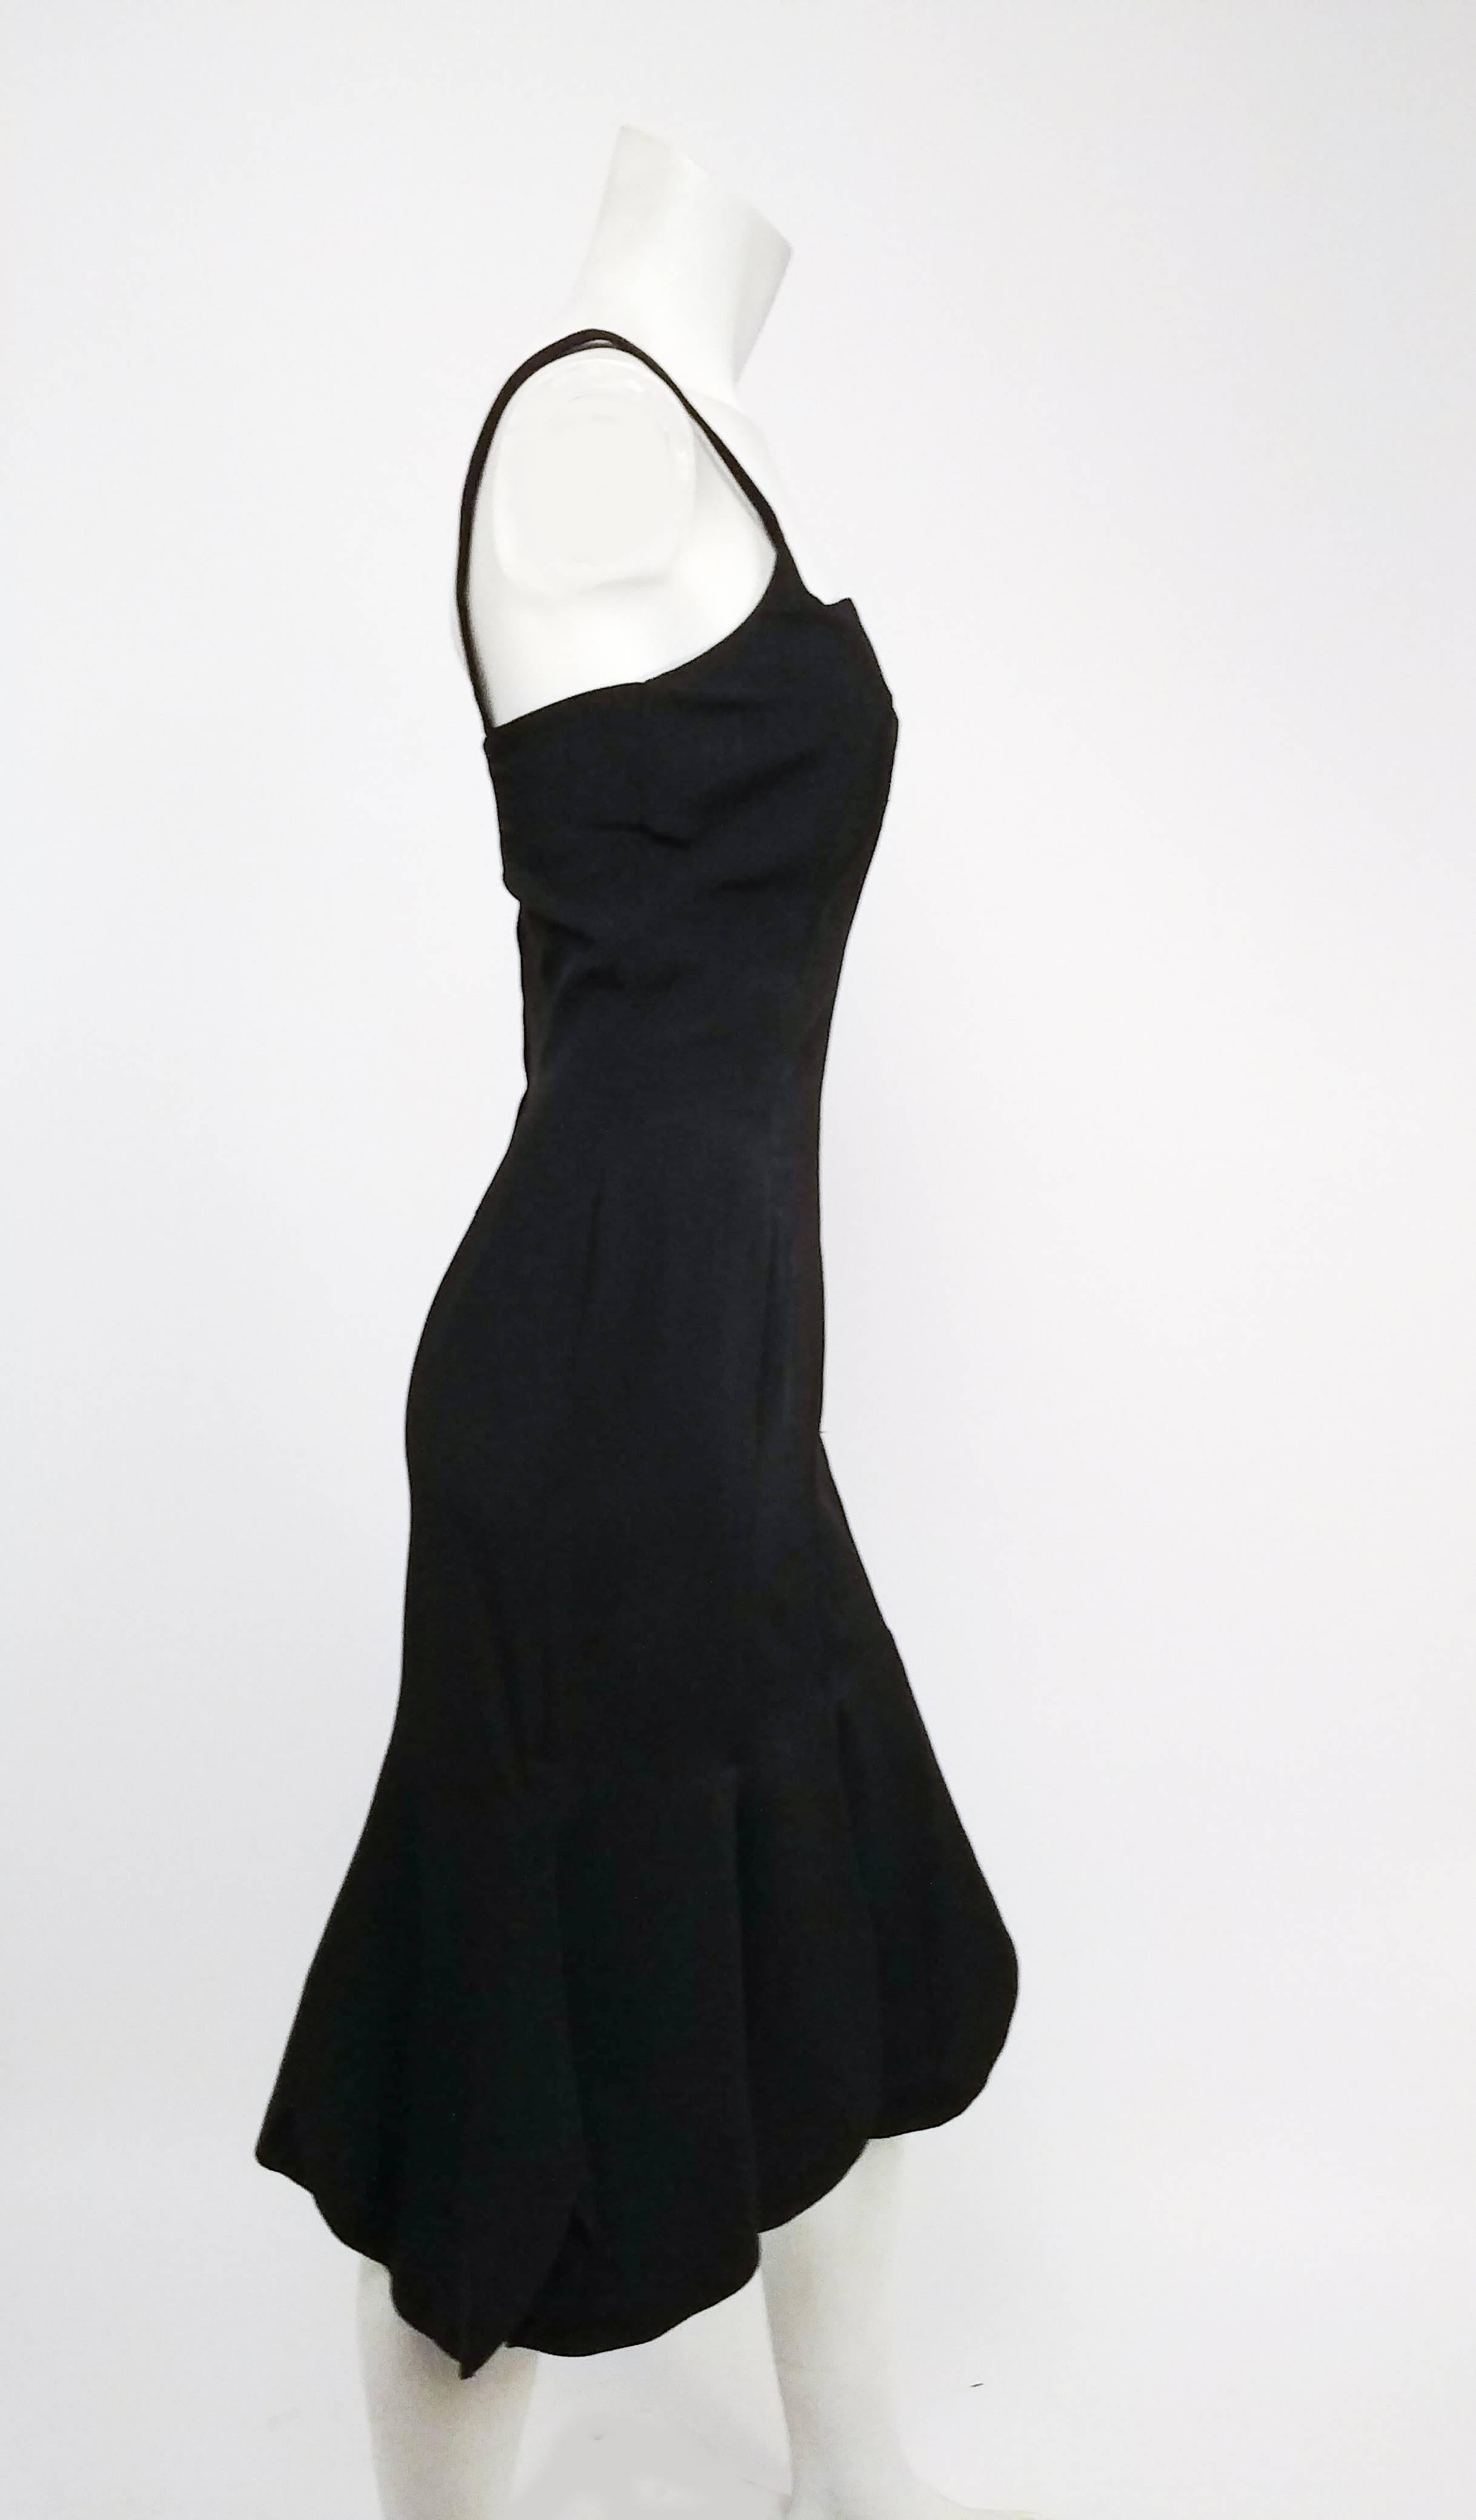 1960s Black Petal Hem Cocktail Dress. Black crepe fabric. Sweetheart neckline. Flares out at the knee with some extreme scallops which look like flower petals! Zips up back. 